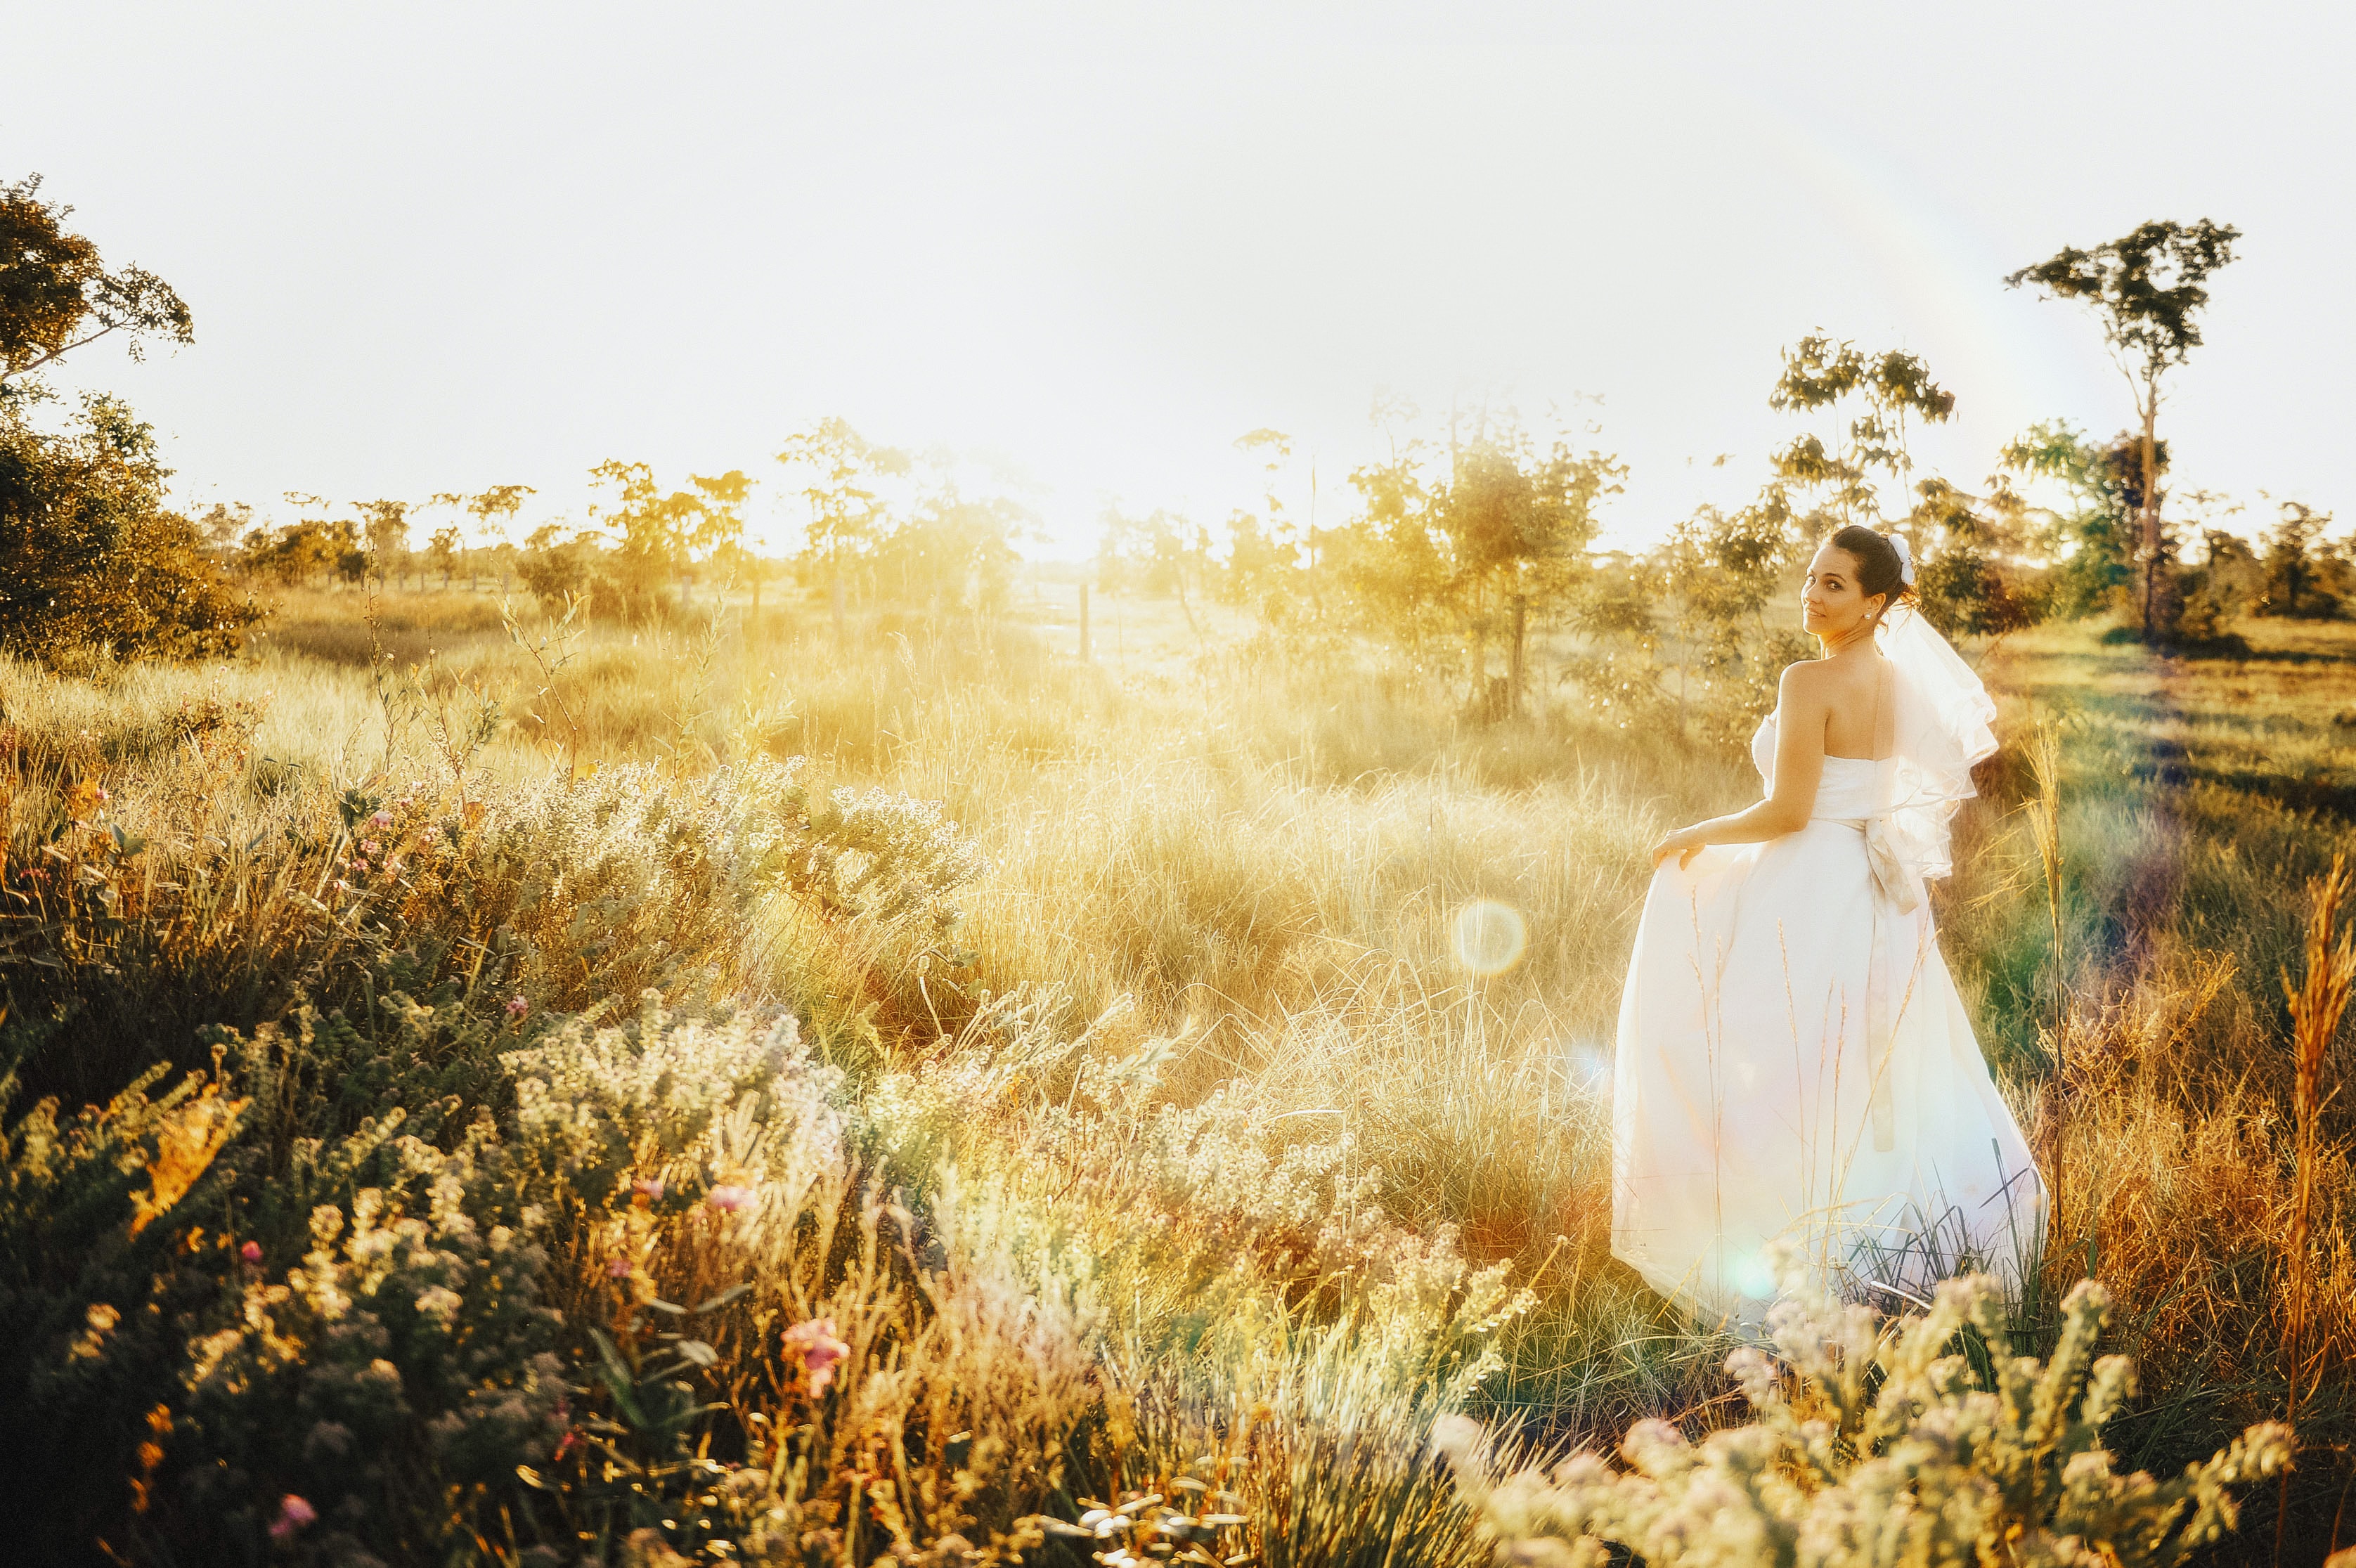 In this picture the bride was walking through the forest on her wedding day and she was leaving, it was a Sunday afternoon when I called her and she looked back. It was a spontaneous moment that gave this wonderful image. I loved!